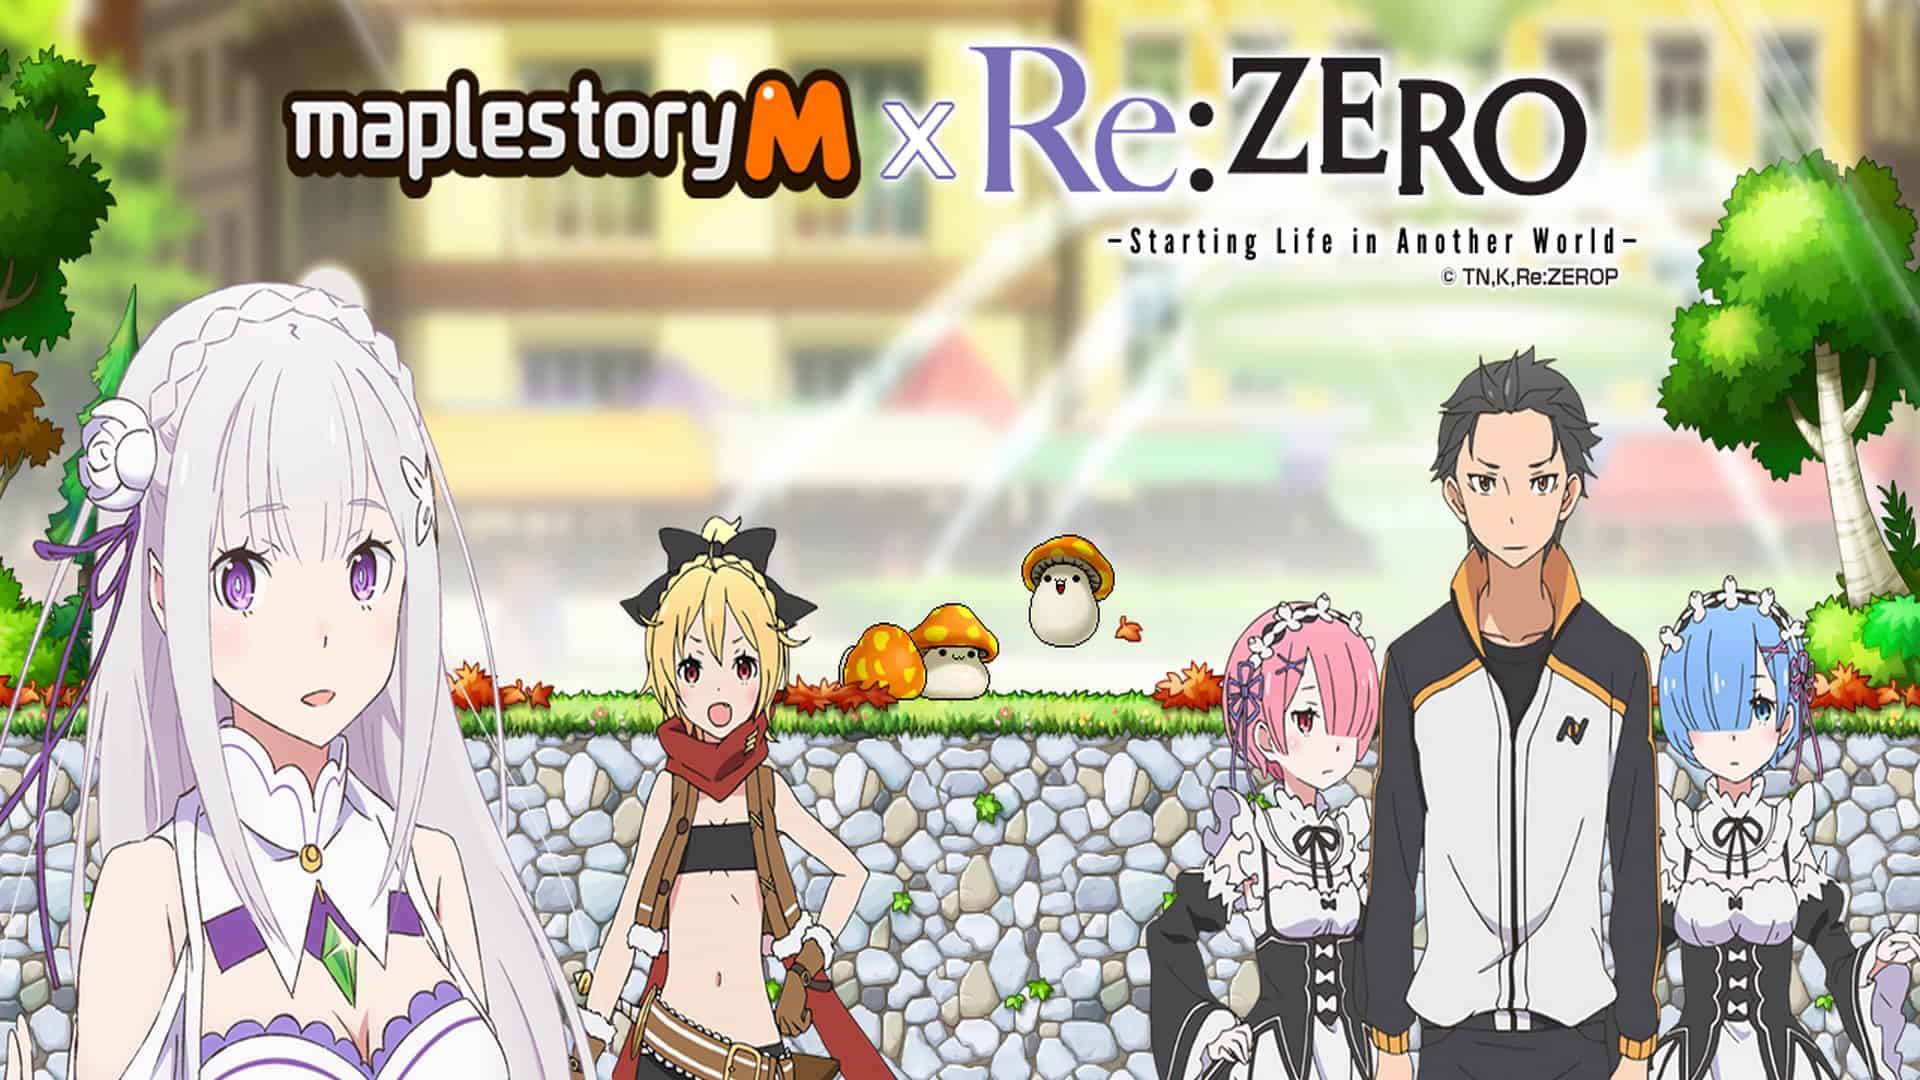 First-Ever MapleStory M Crossover Arrives Today with Popular Anime Series Re:ZERO!